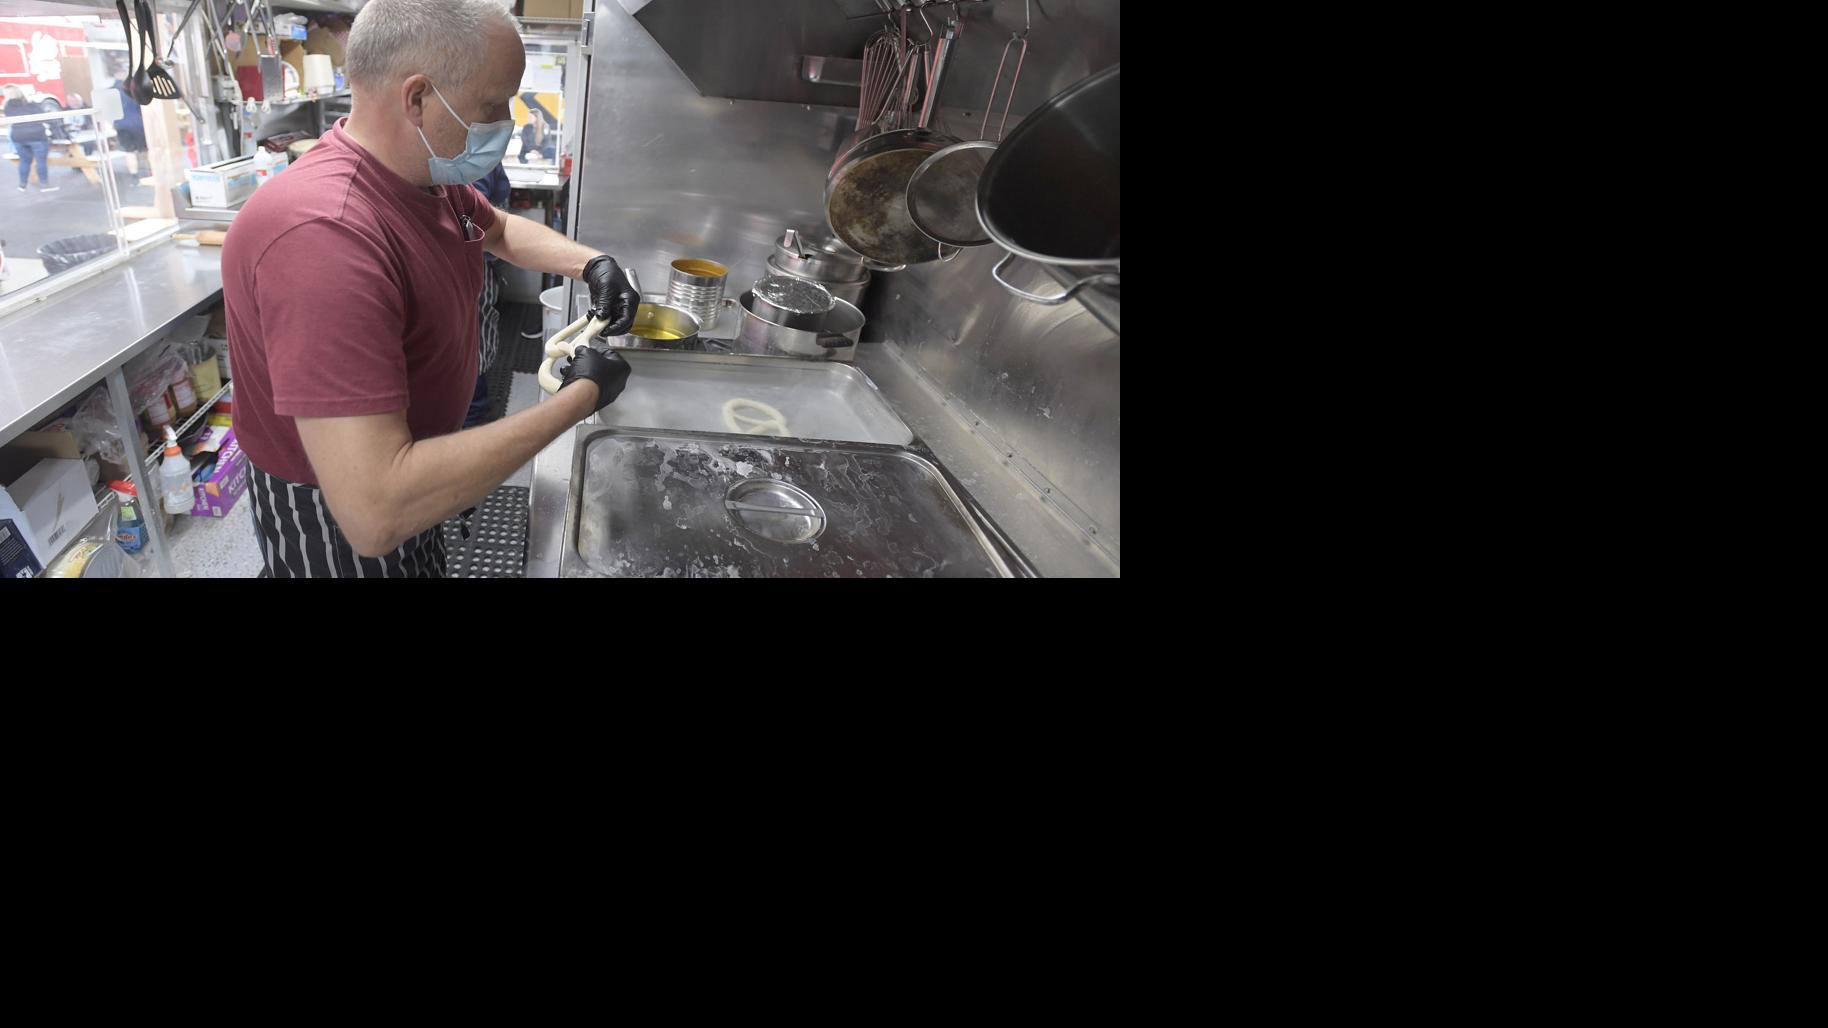 Open air dining: Mid-valley food carts seen as safer ...